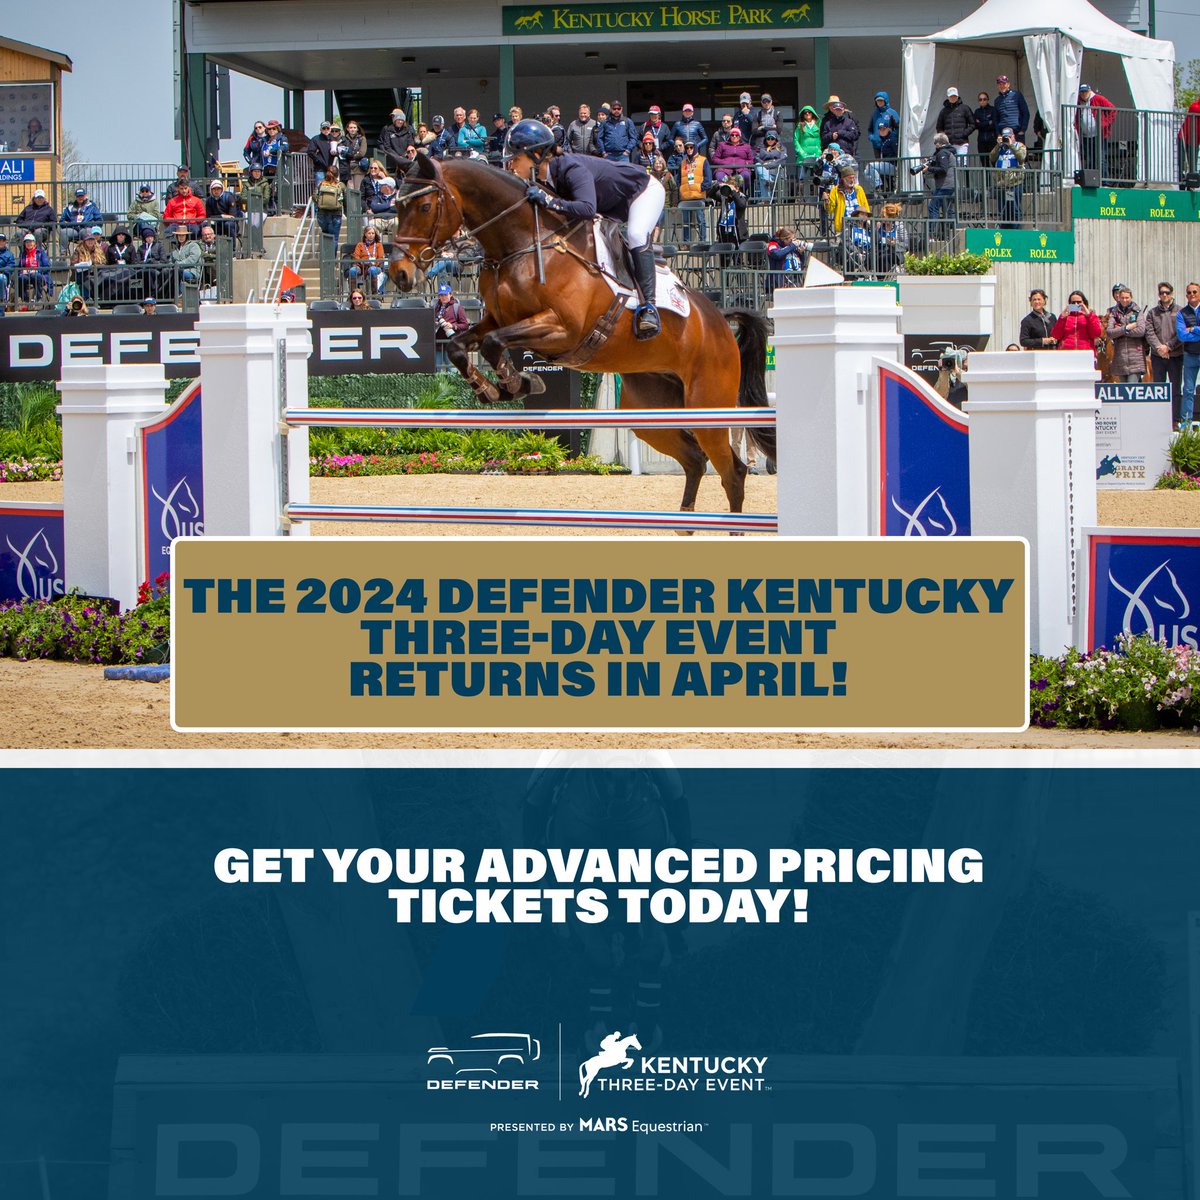 The 2024 Defender Kentucky Three-Day Event returns April 25-28. Get your Advanced Pricing tickets today. Link below: kentuckythreedayevent.com/tickets